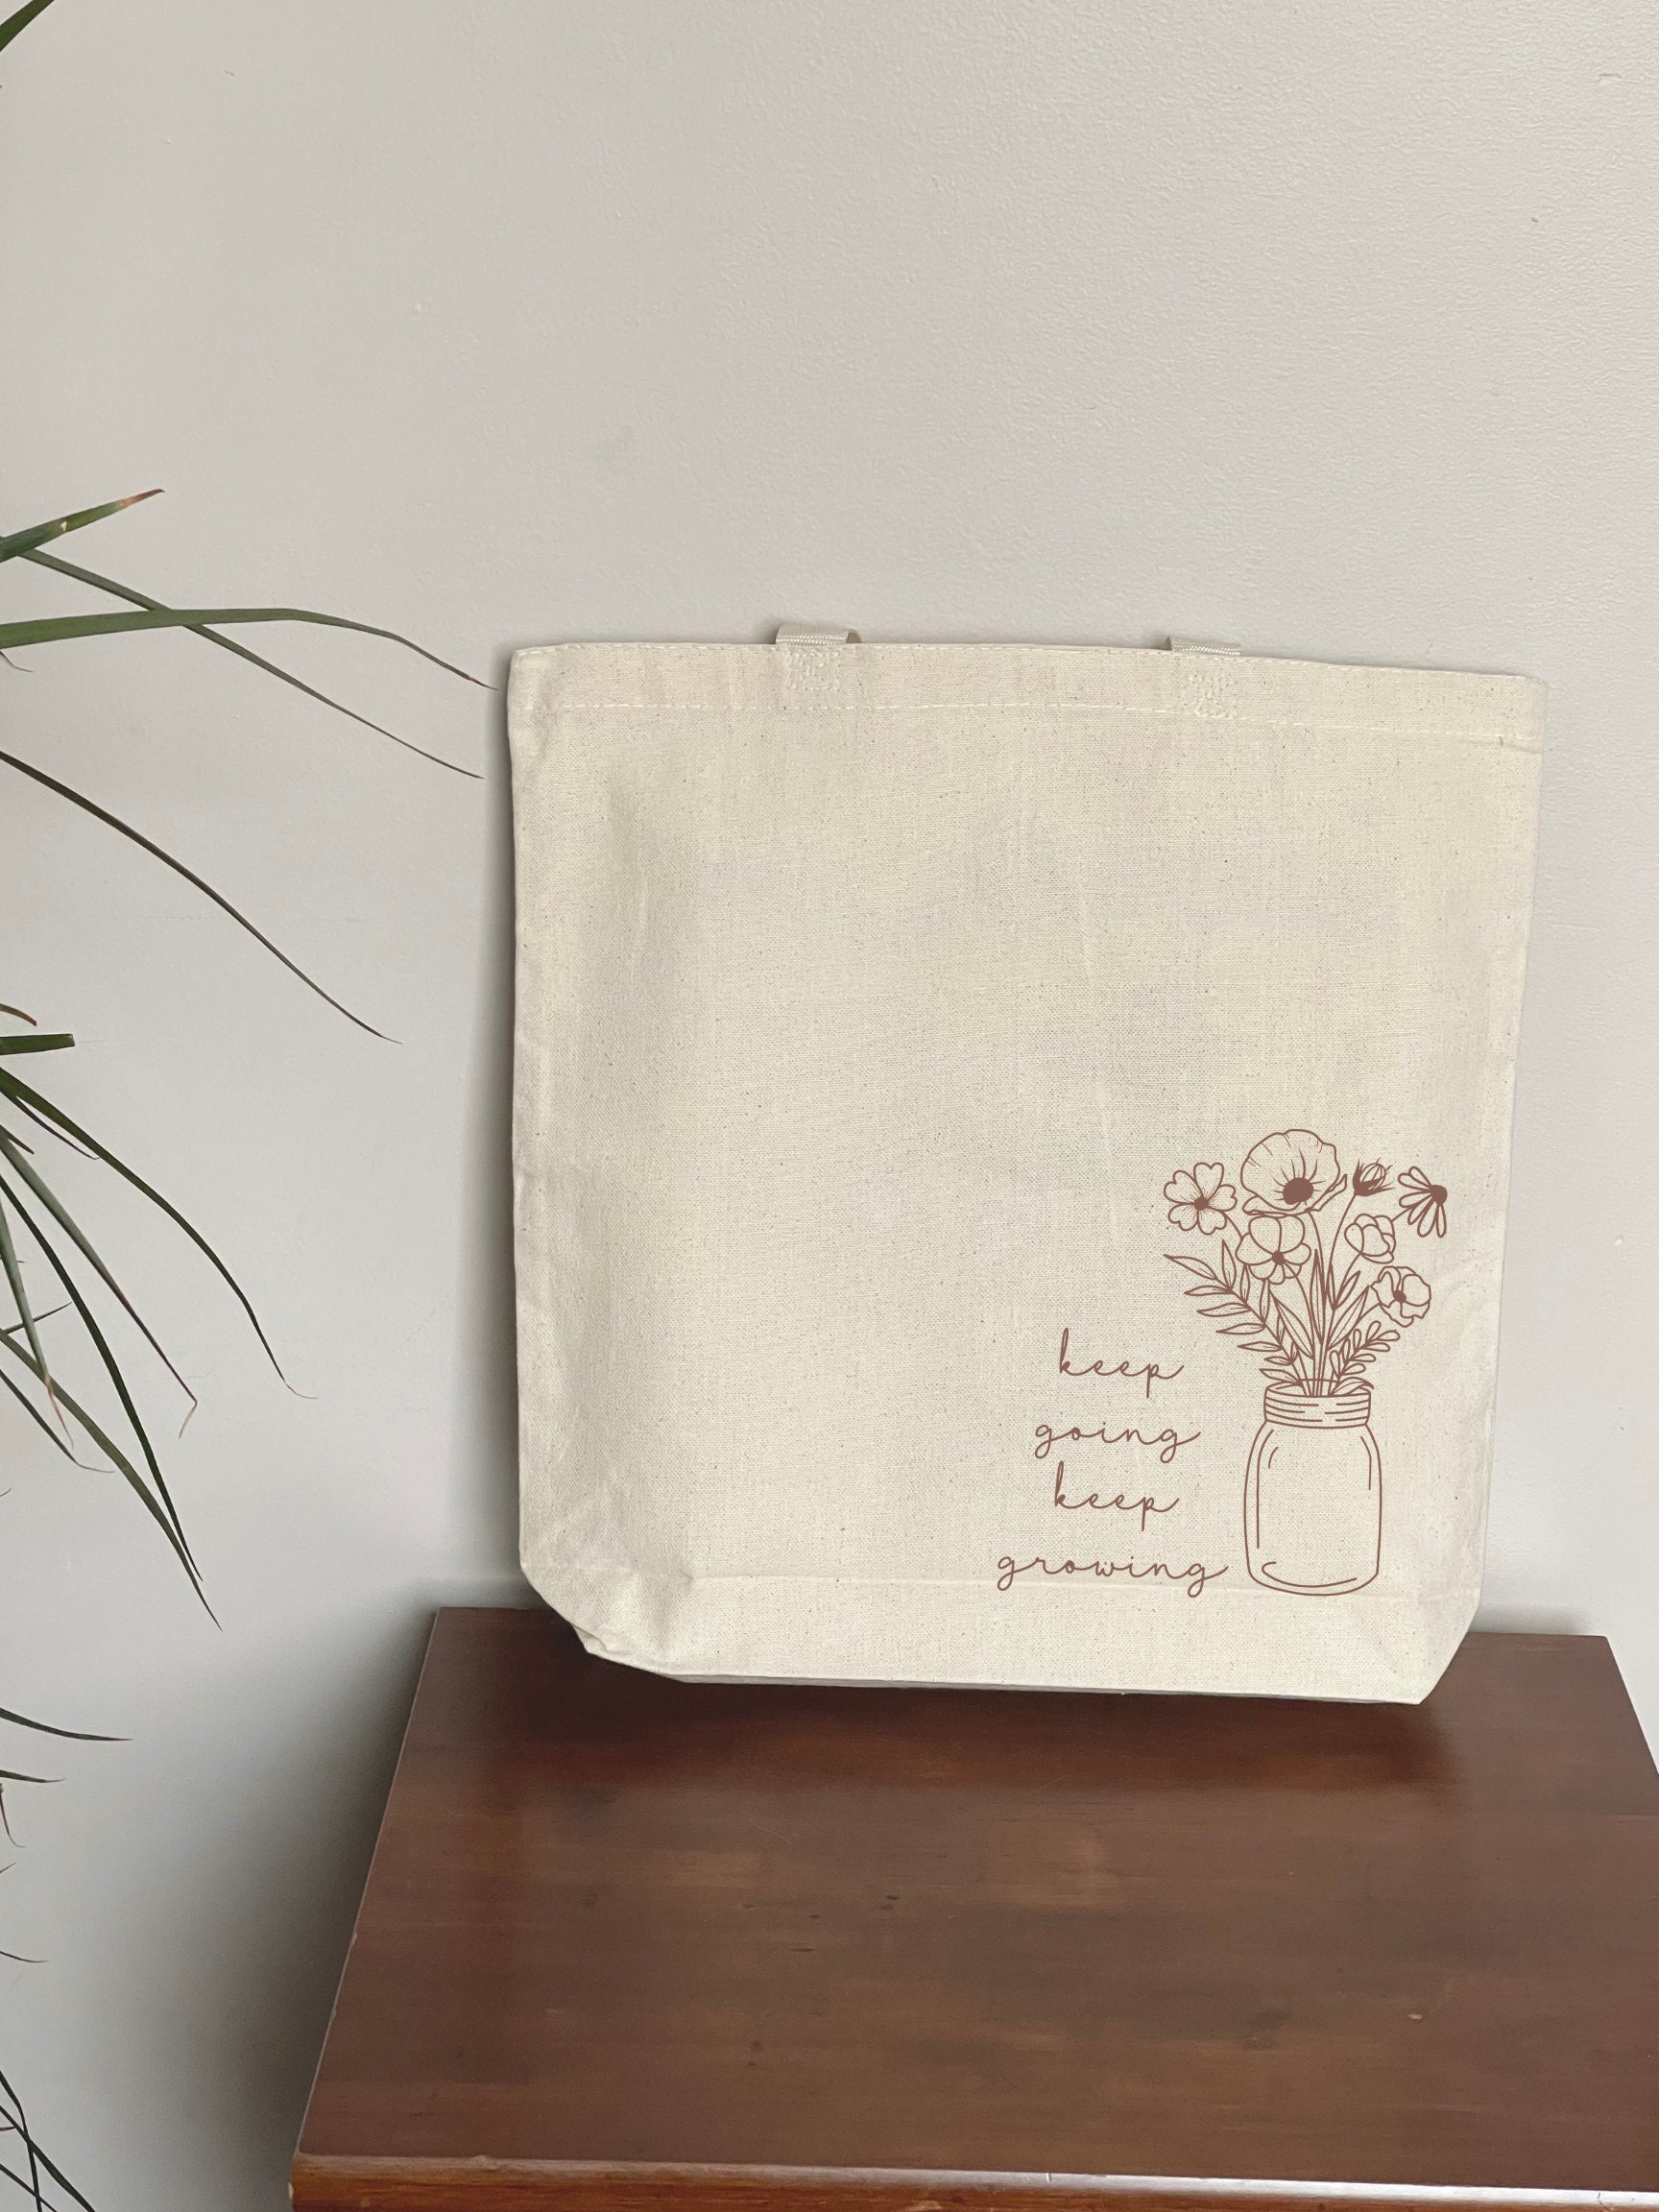 Keep Going Keep Growing Plant Tote Bag Wildflower Tote Canvas